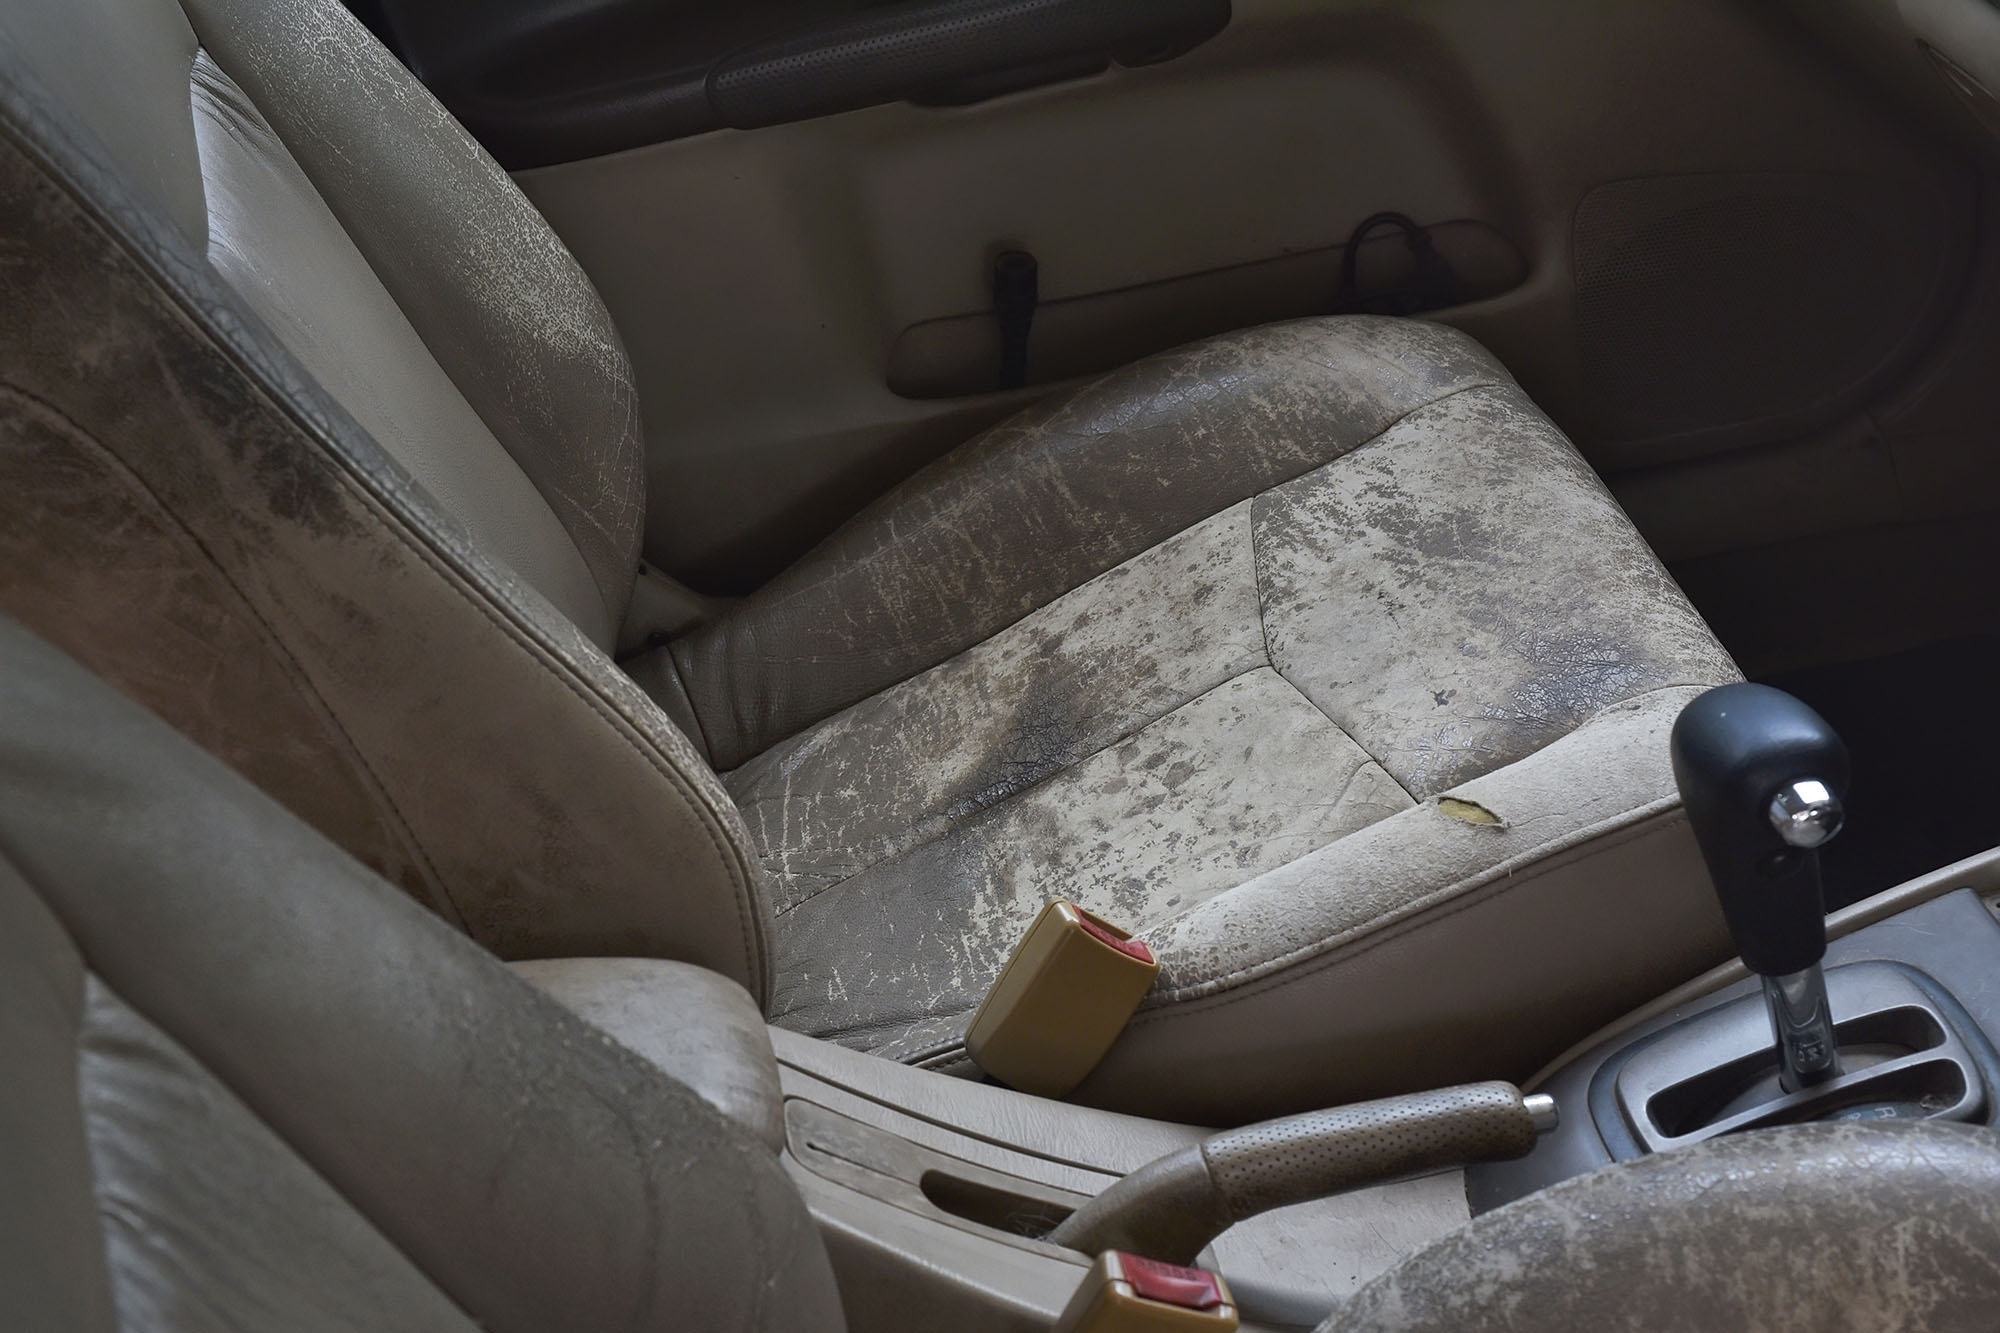 Worn-out car interior